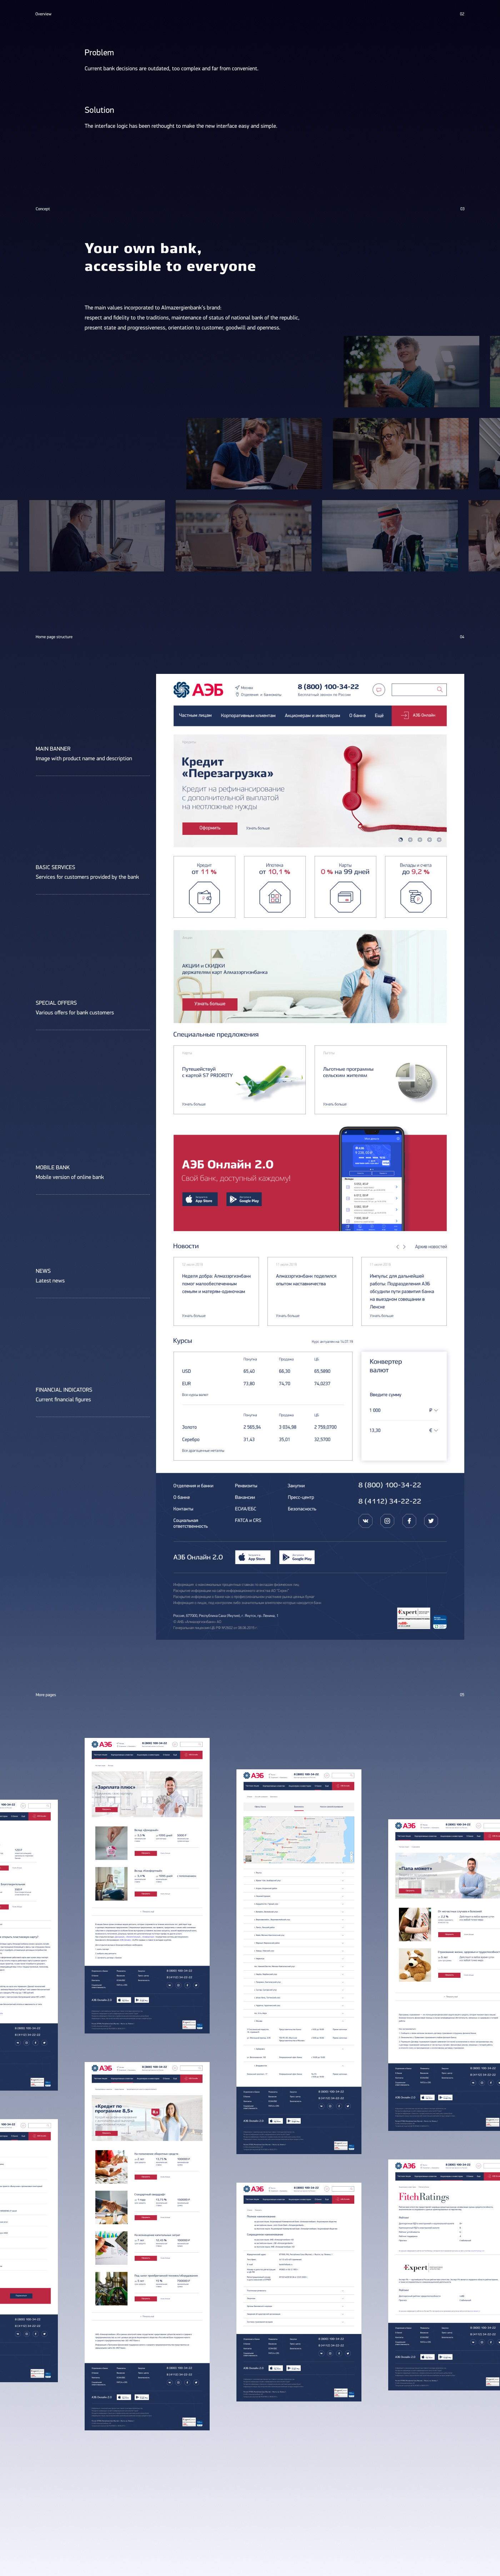 Bank finance service ux UI product banking financial corporate Web